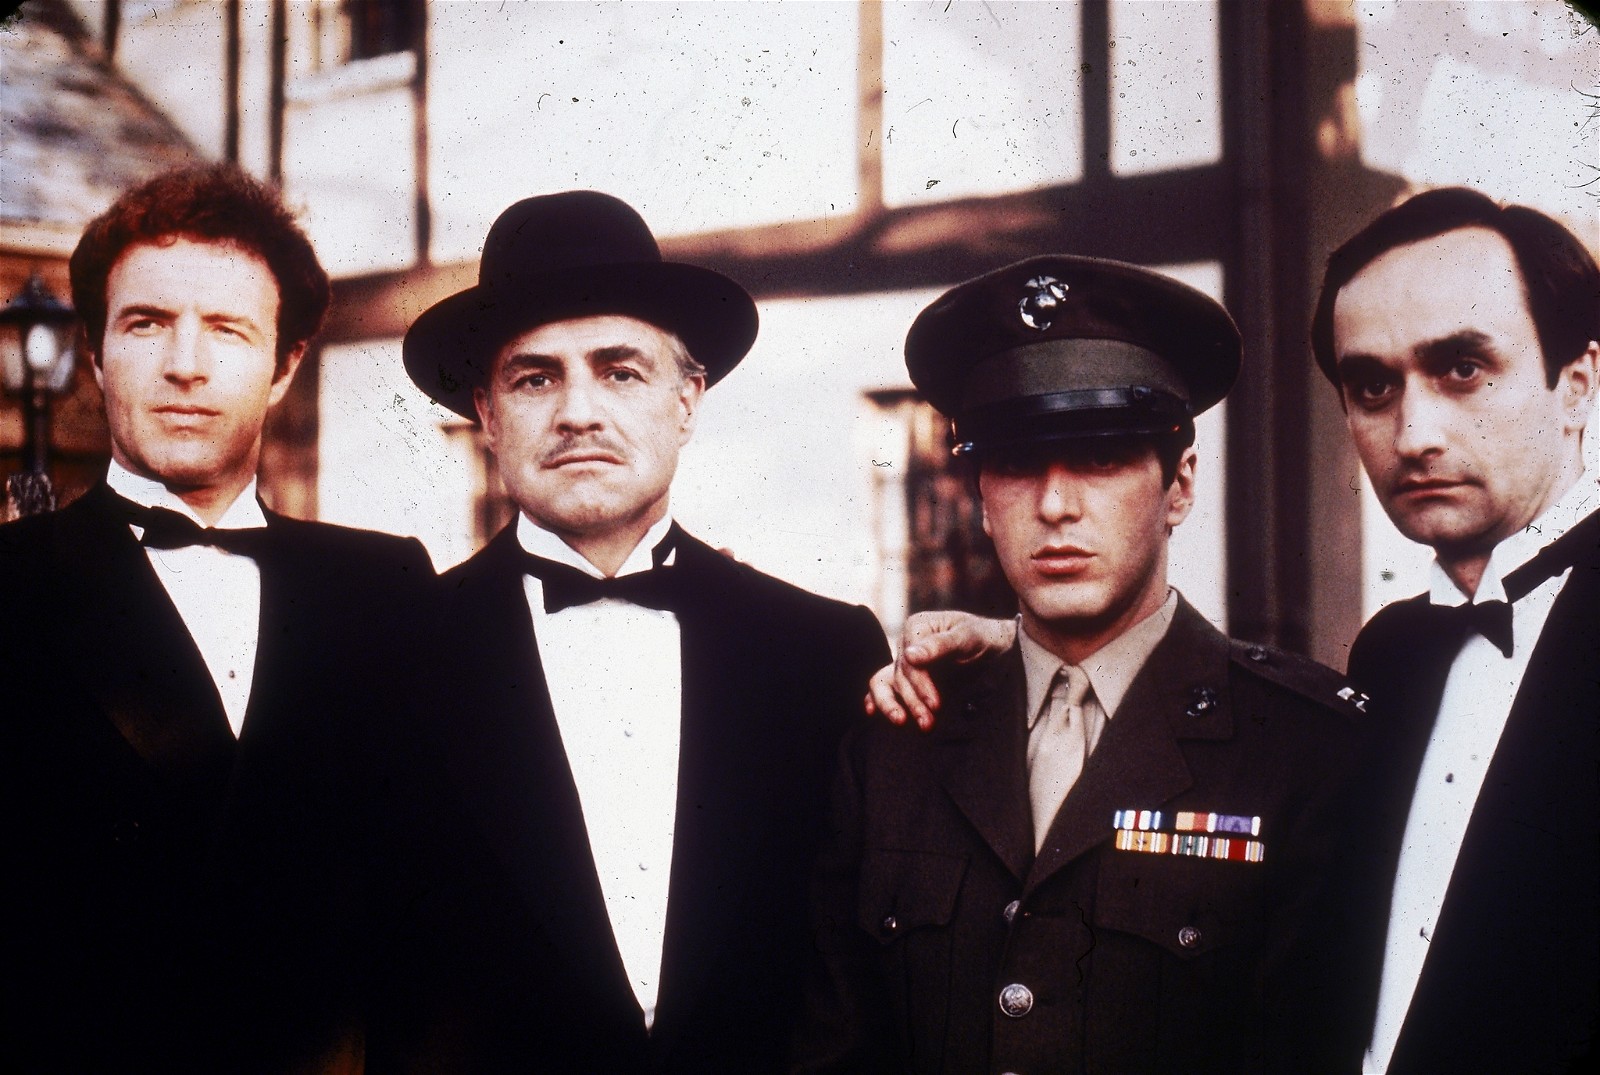 Francis Ford Coppola's The Godfather